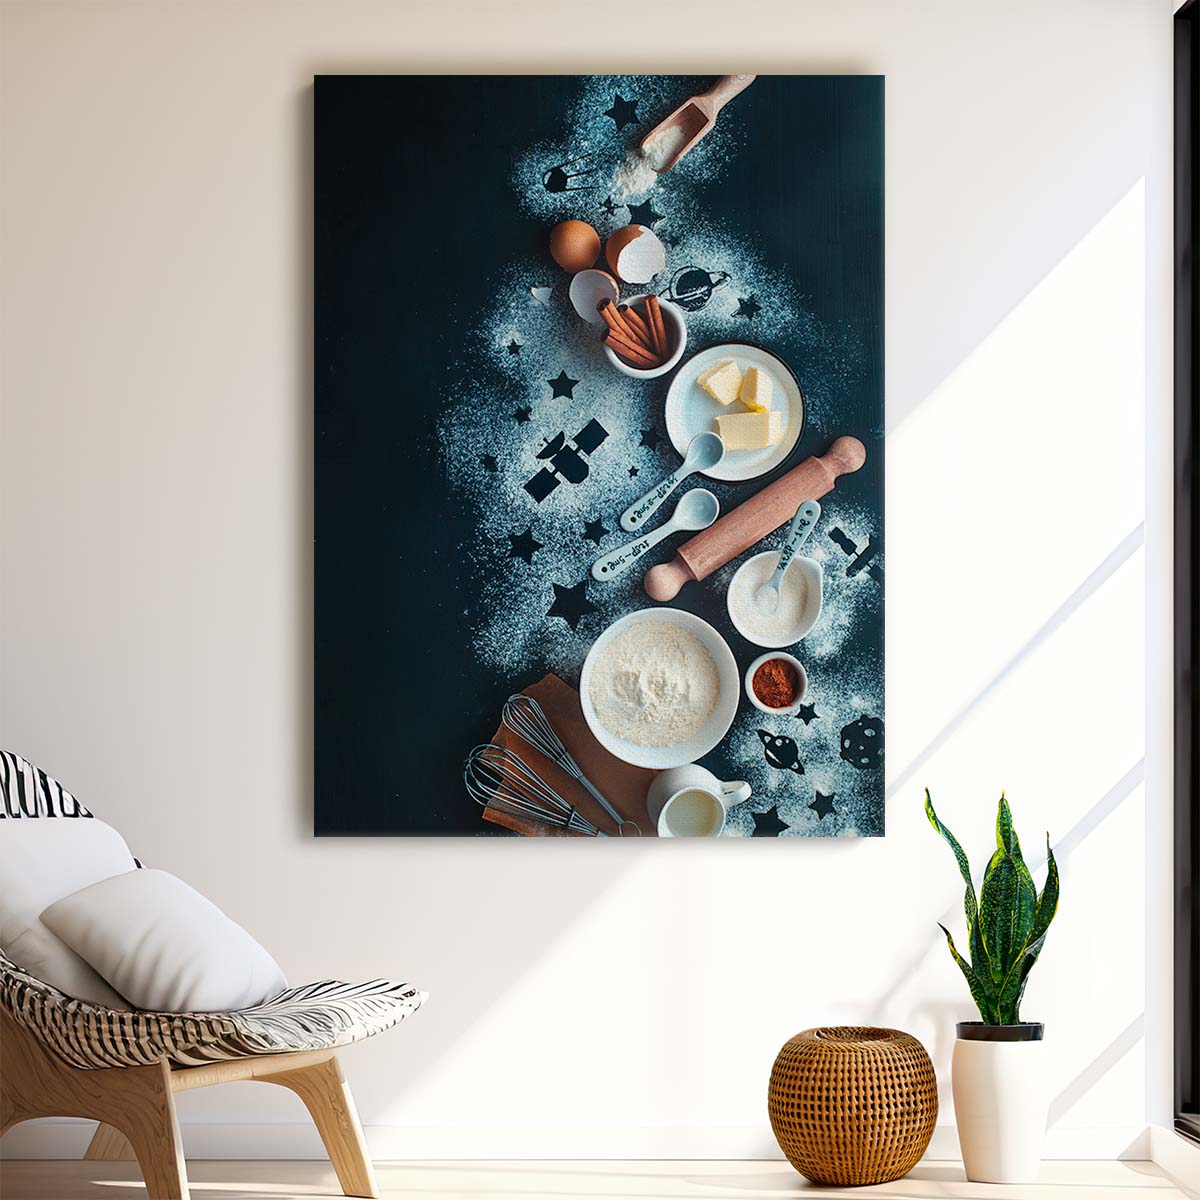 Saturn-Inspired Still Life Photography of Baking Ingredients by Luxuriance Designs, made in USA